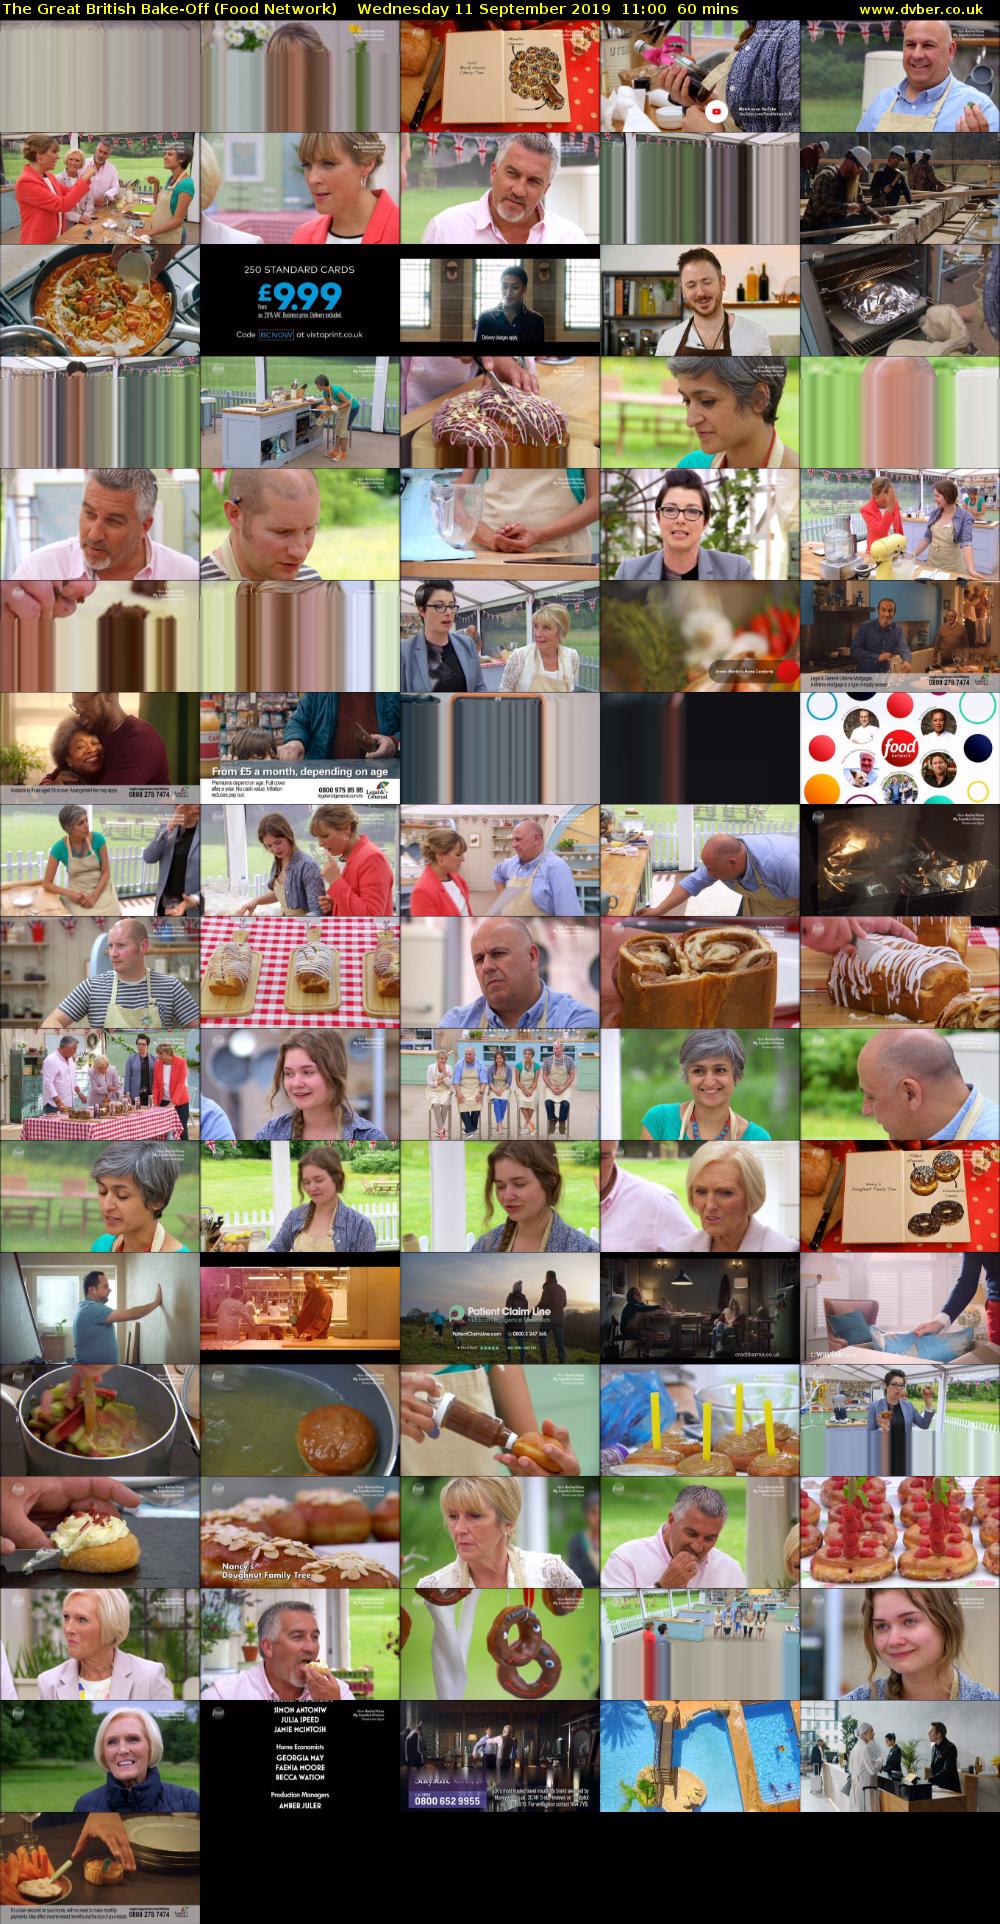 The Great British Bake-Off (Food Network) Wednesday 11 September 2019 11:00 - 12:00